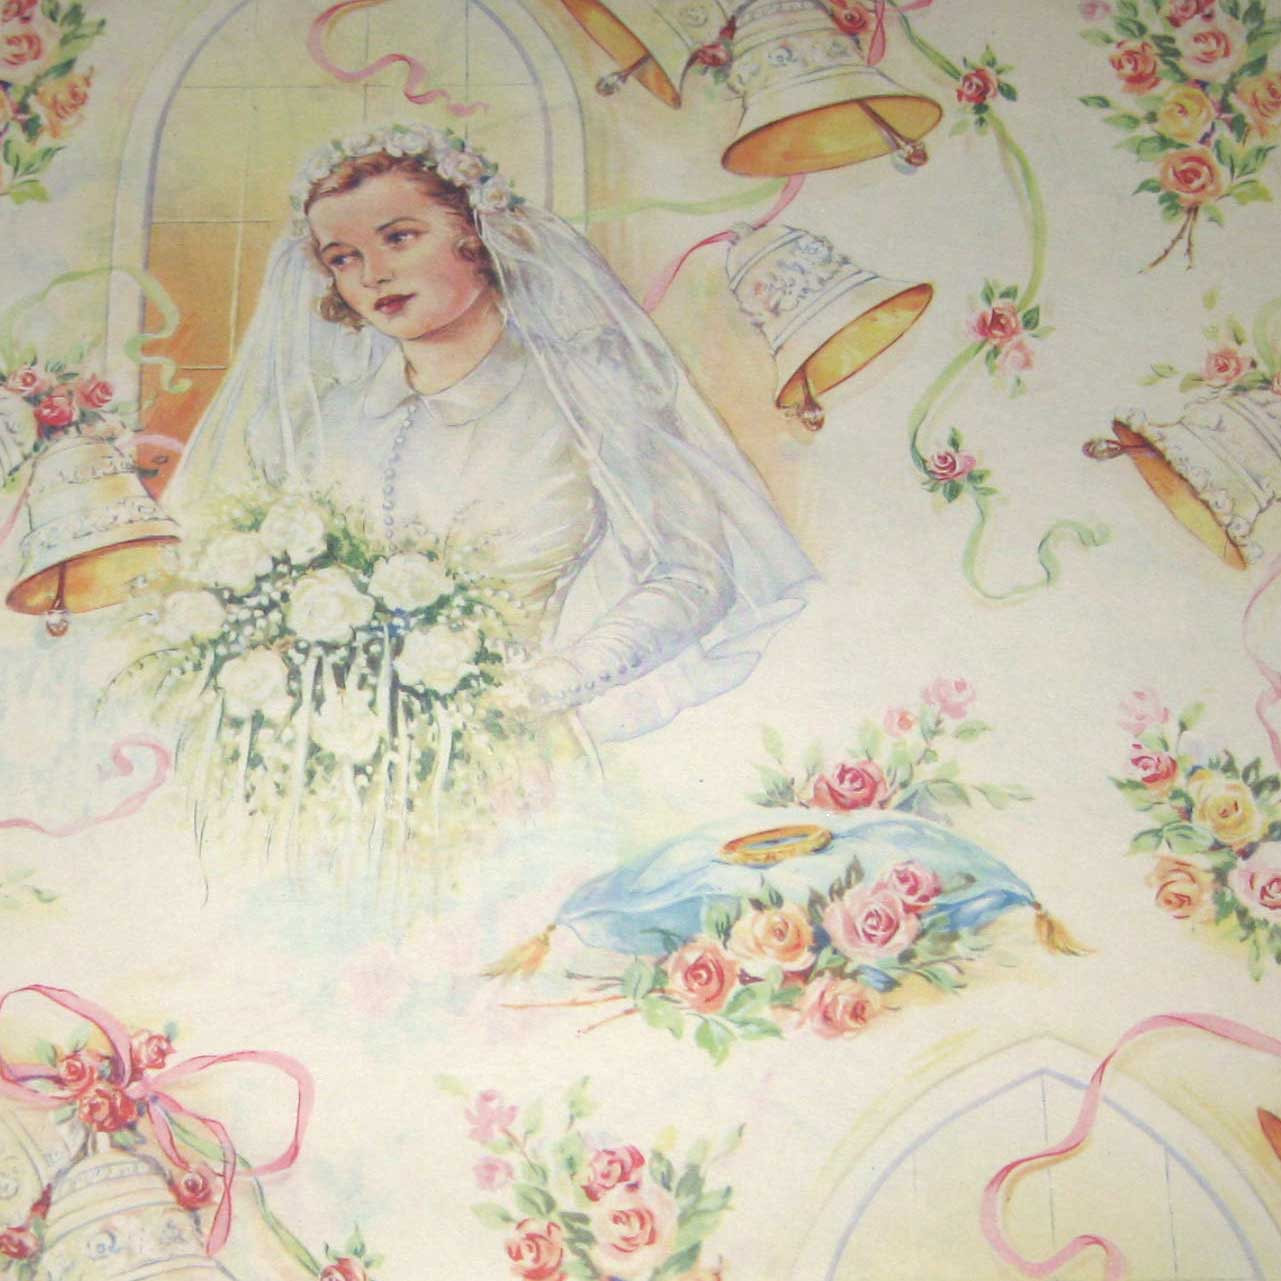 Wedding Gift Wrapping Paper
 Vintage Wedding Wrapping Paper or Gift Wrap by